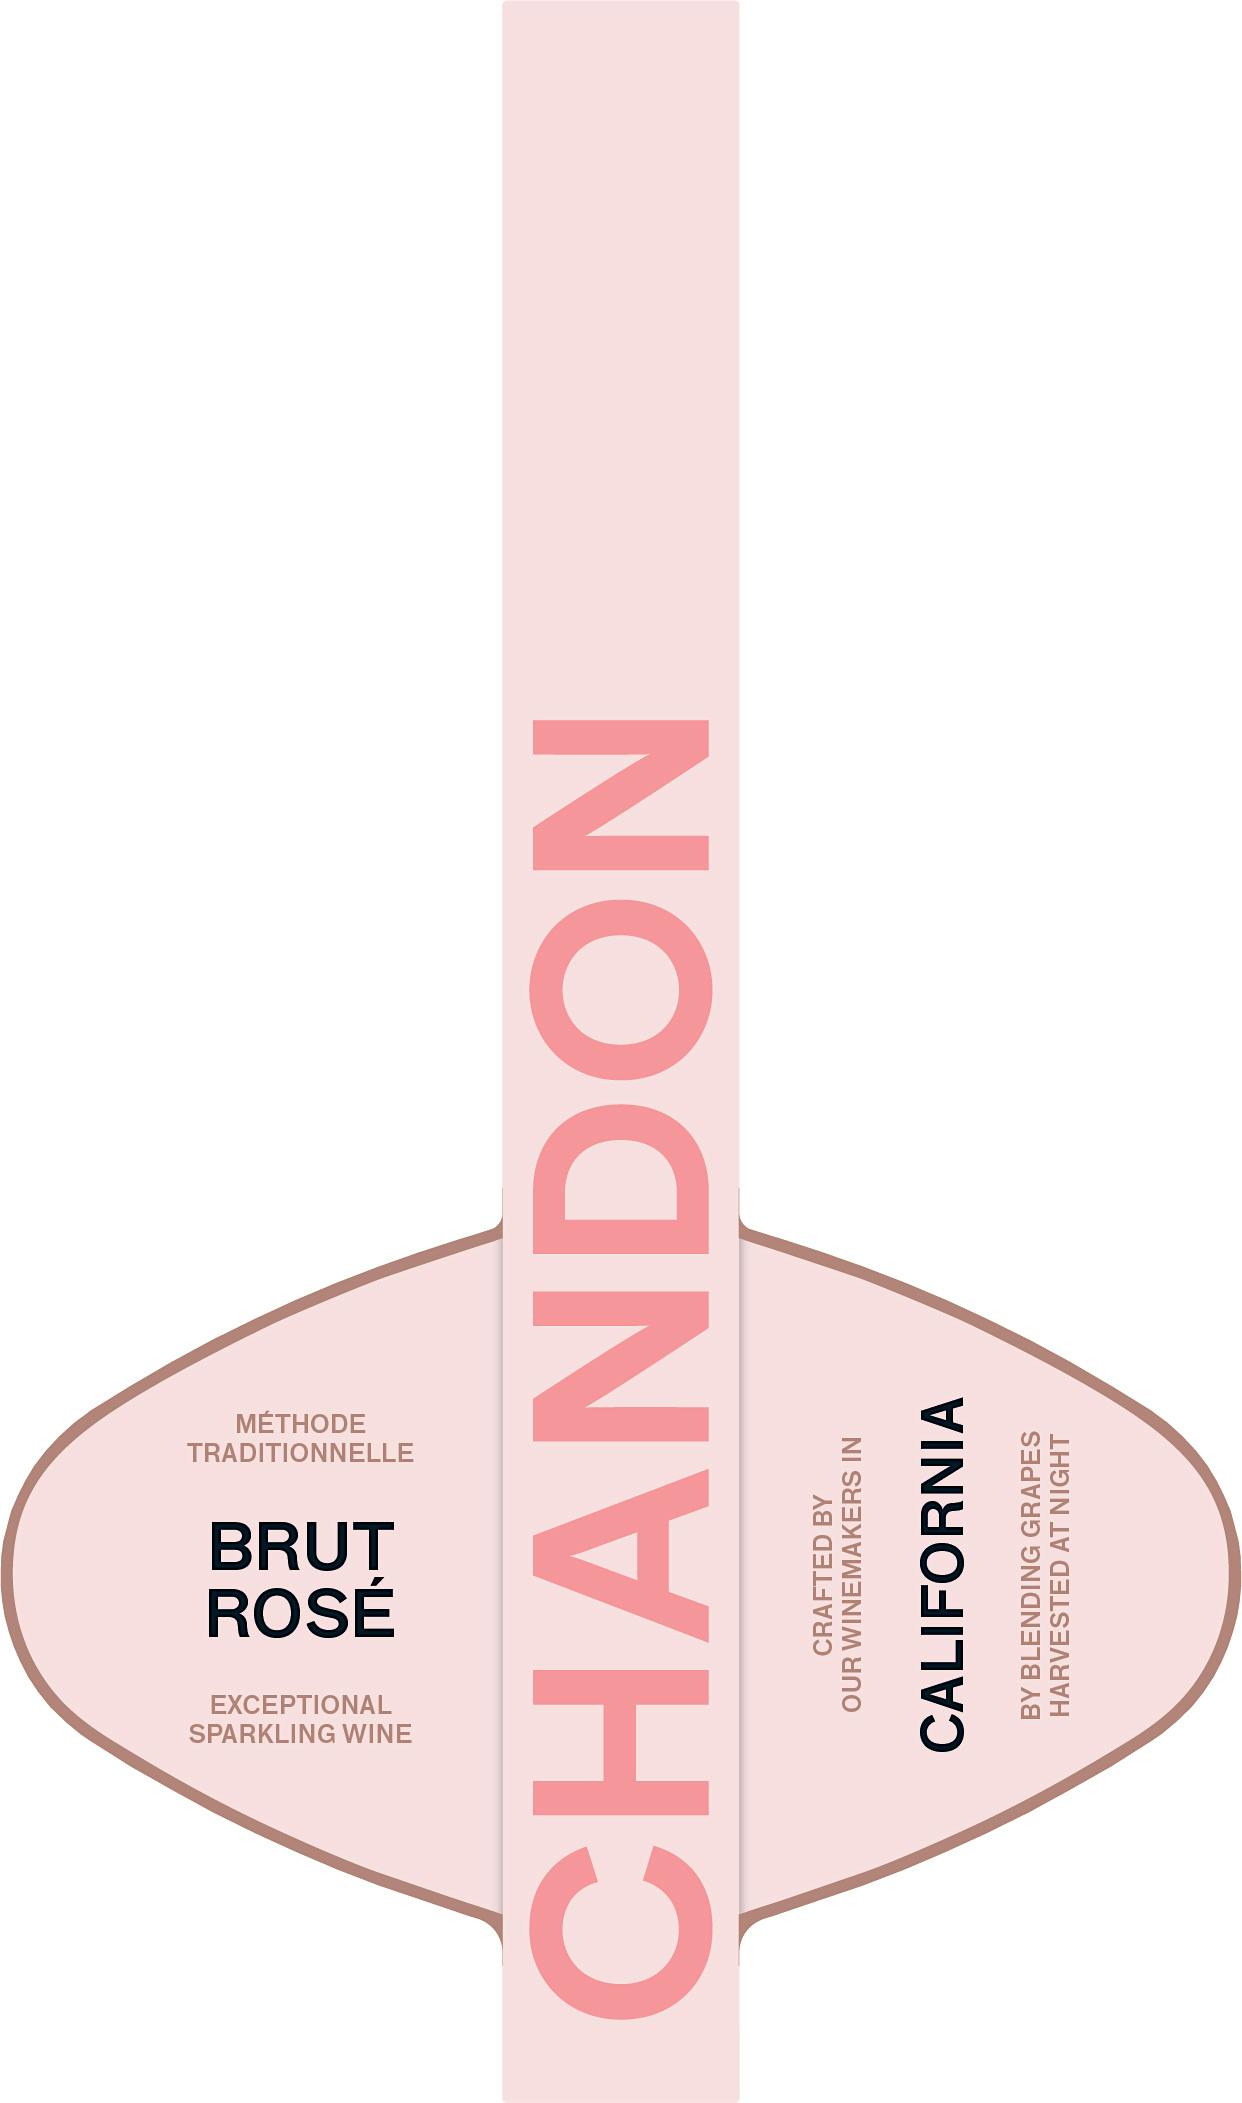 Label for Domaine Chandon